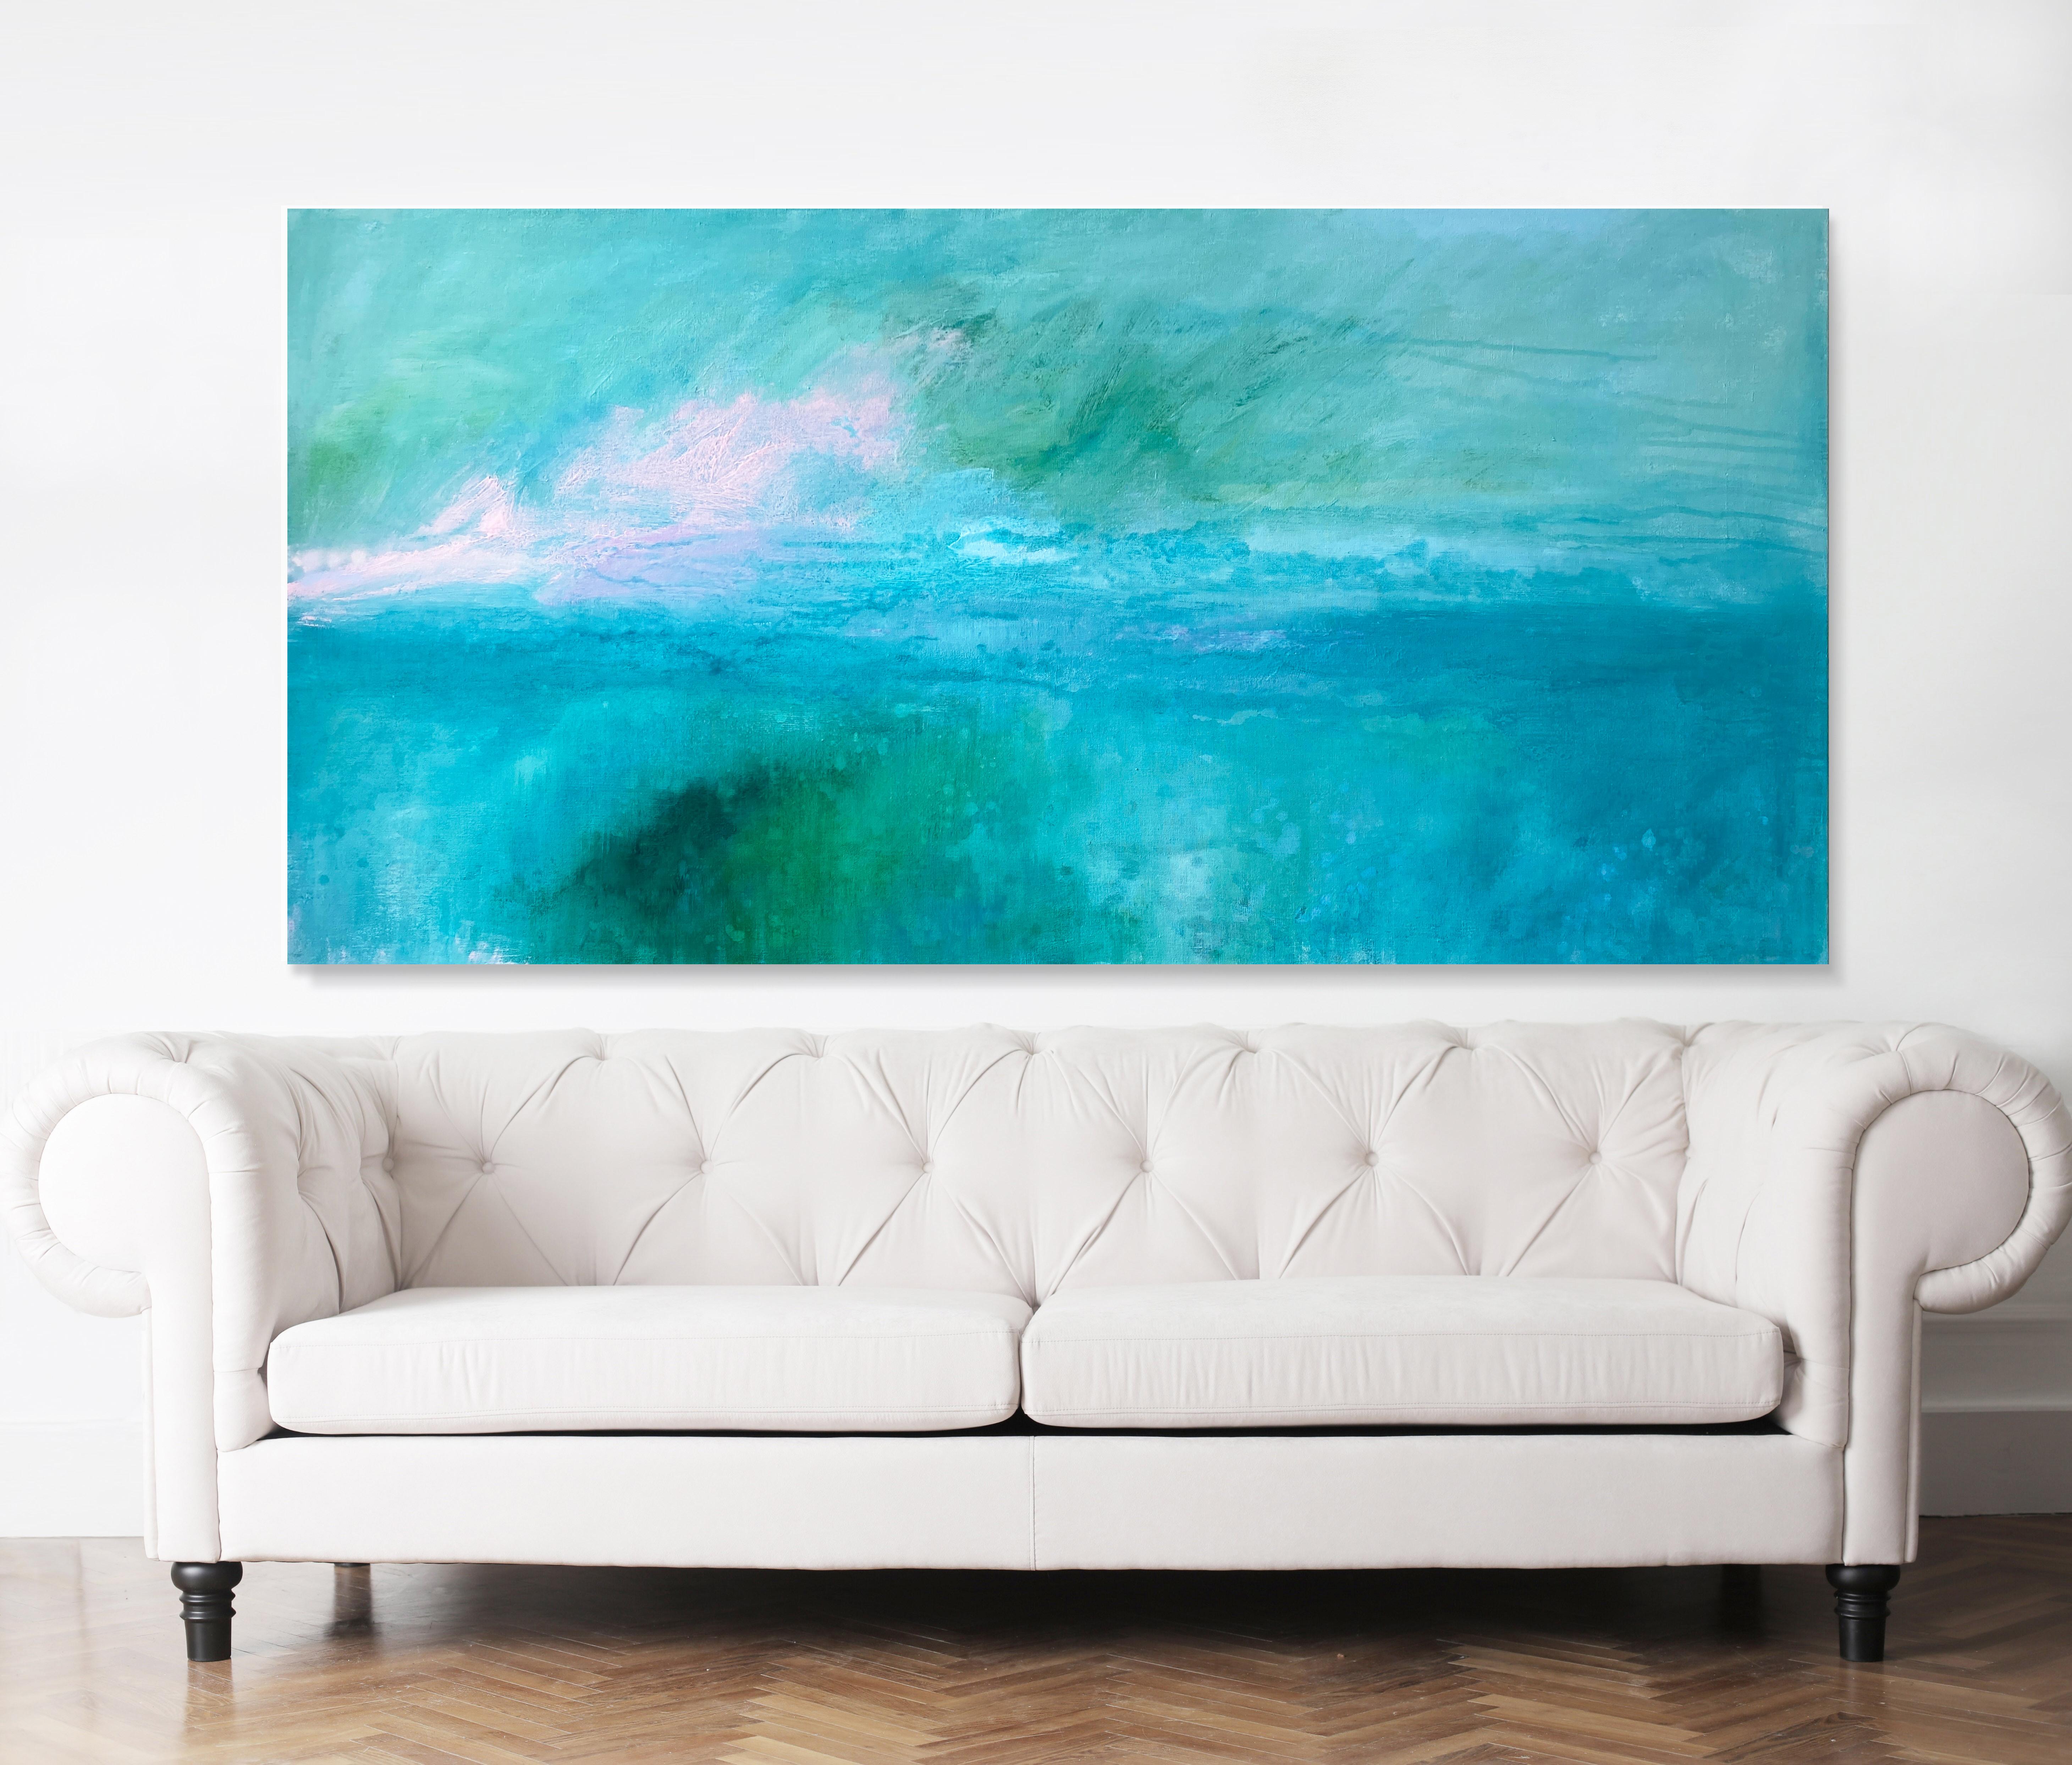 The Secret Garden green abstract landscape blue aqua impressionism sky linen - Abstract Painting by Kathleen Rhee